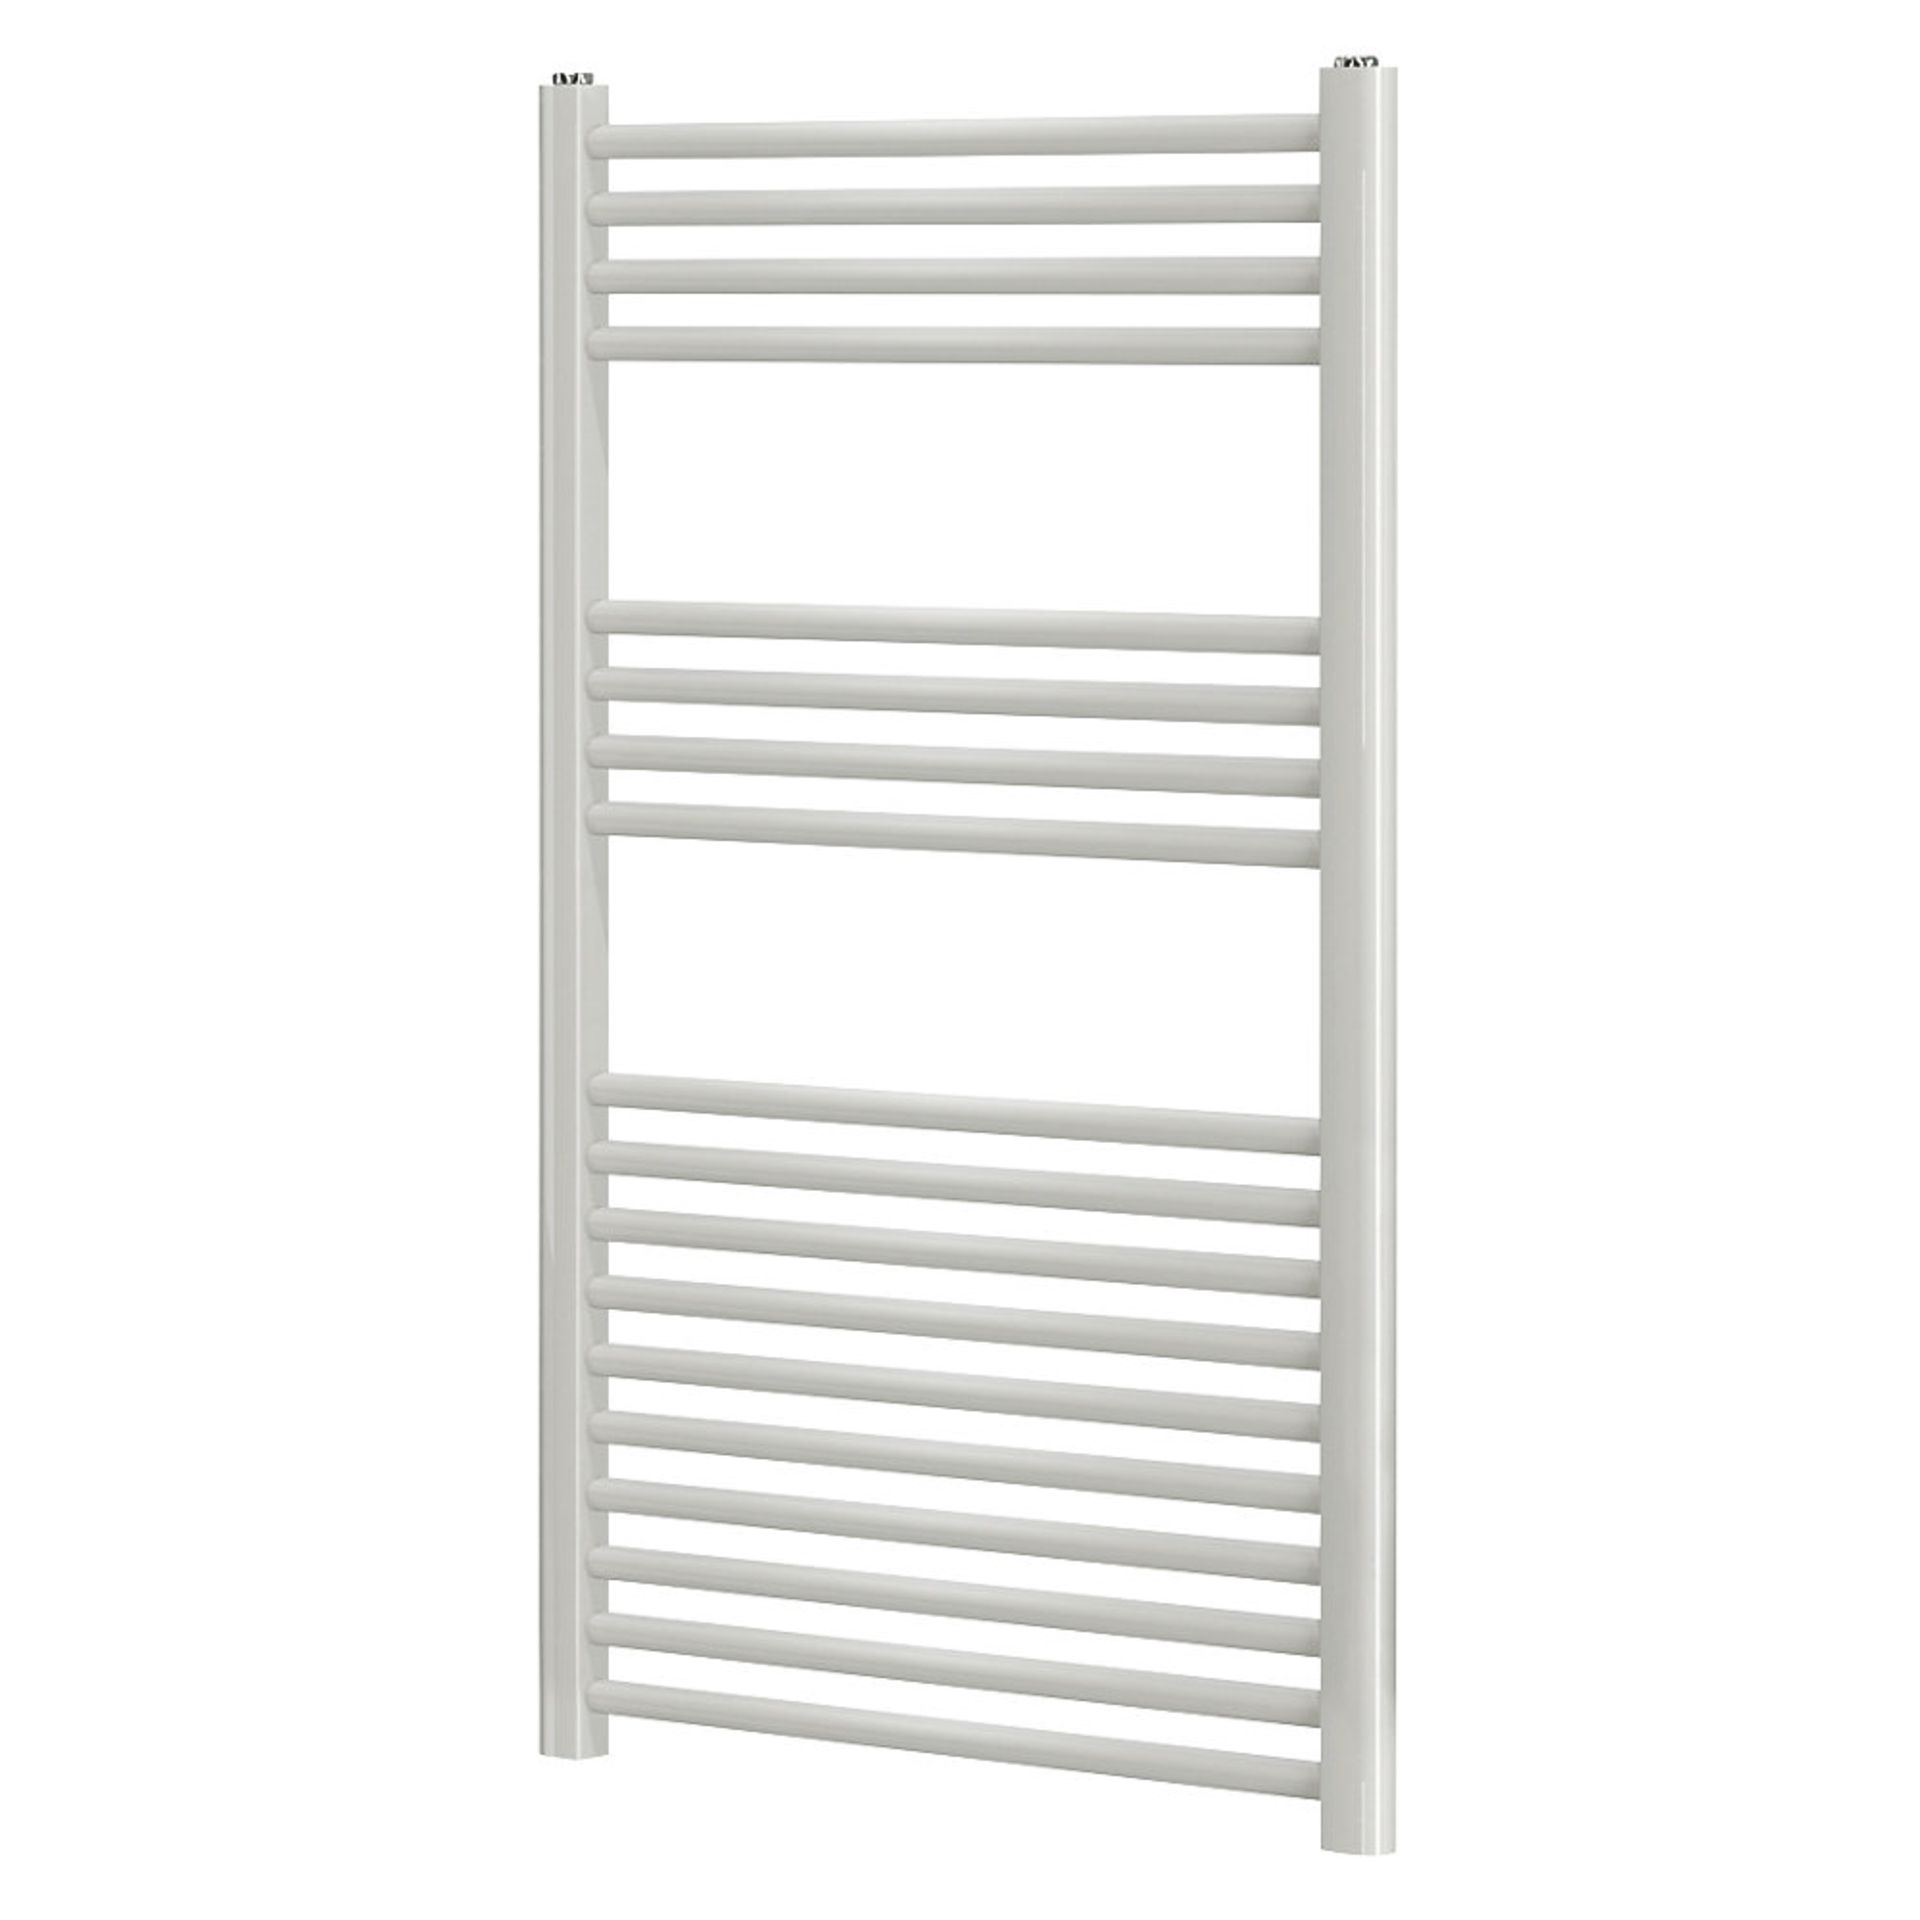 (AD121) 1000 X 600MM BLYSS TOWEL RADIATOR WHITE. High quality steel construction with powder-